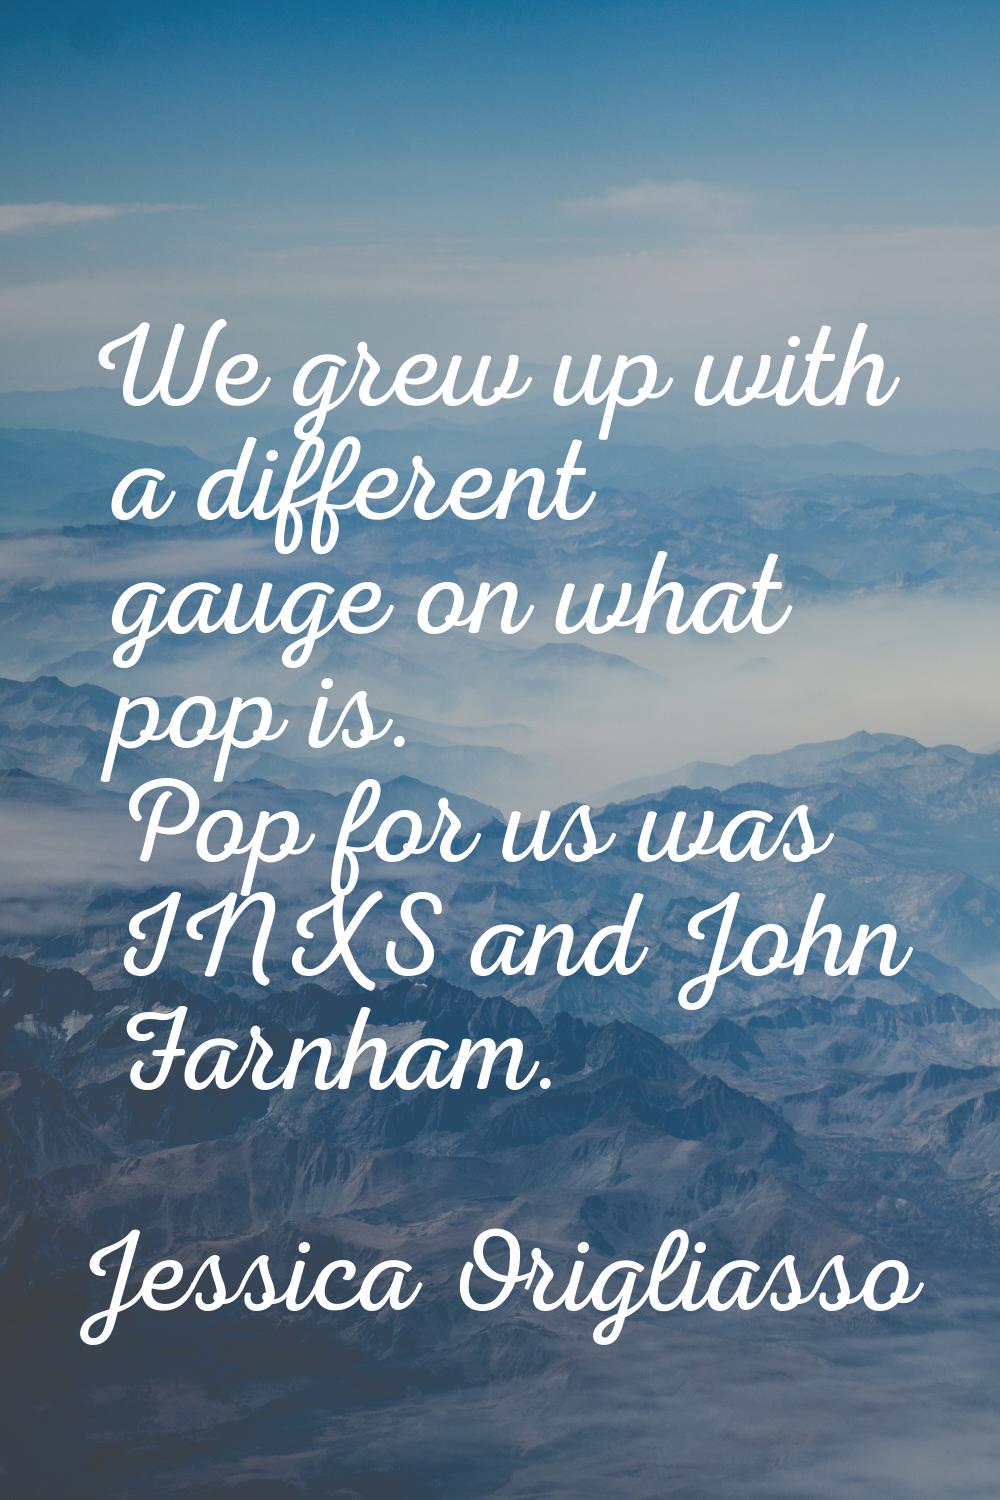 We grew up with a different gauge on what pop is. Pop for us was INXS and John Farnham.